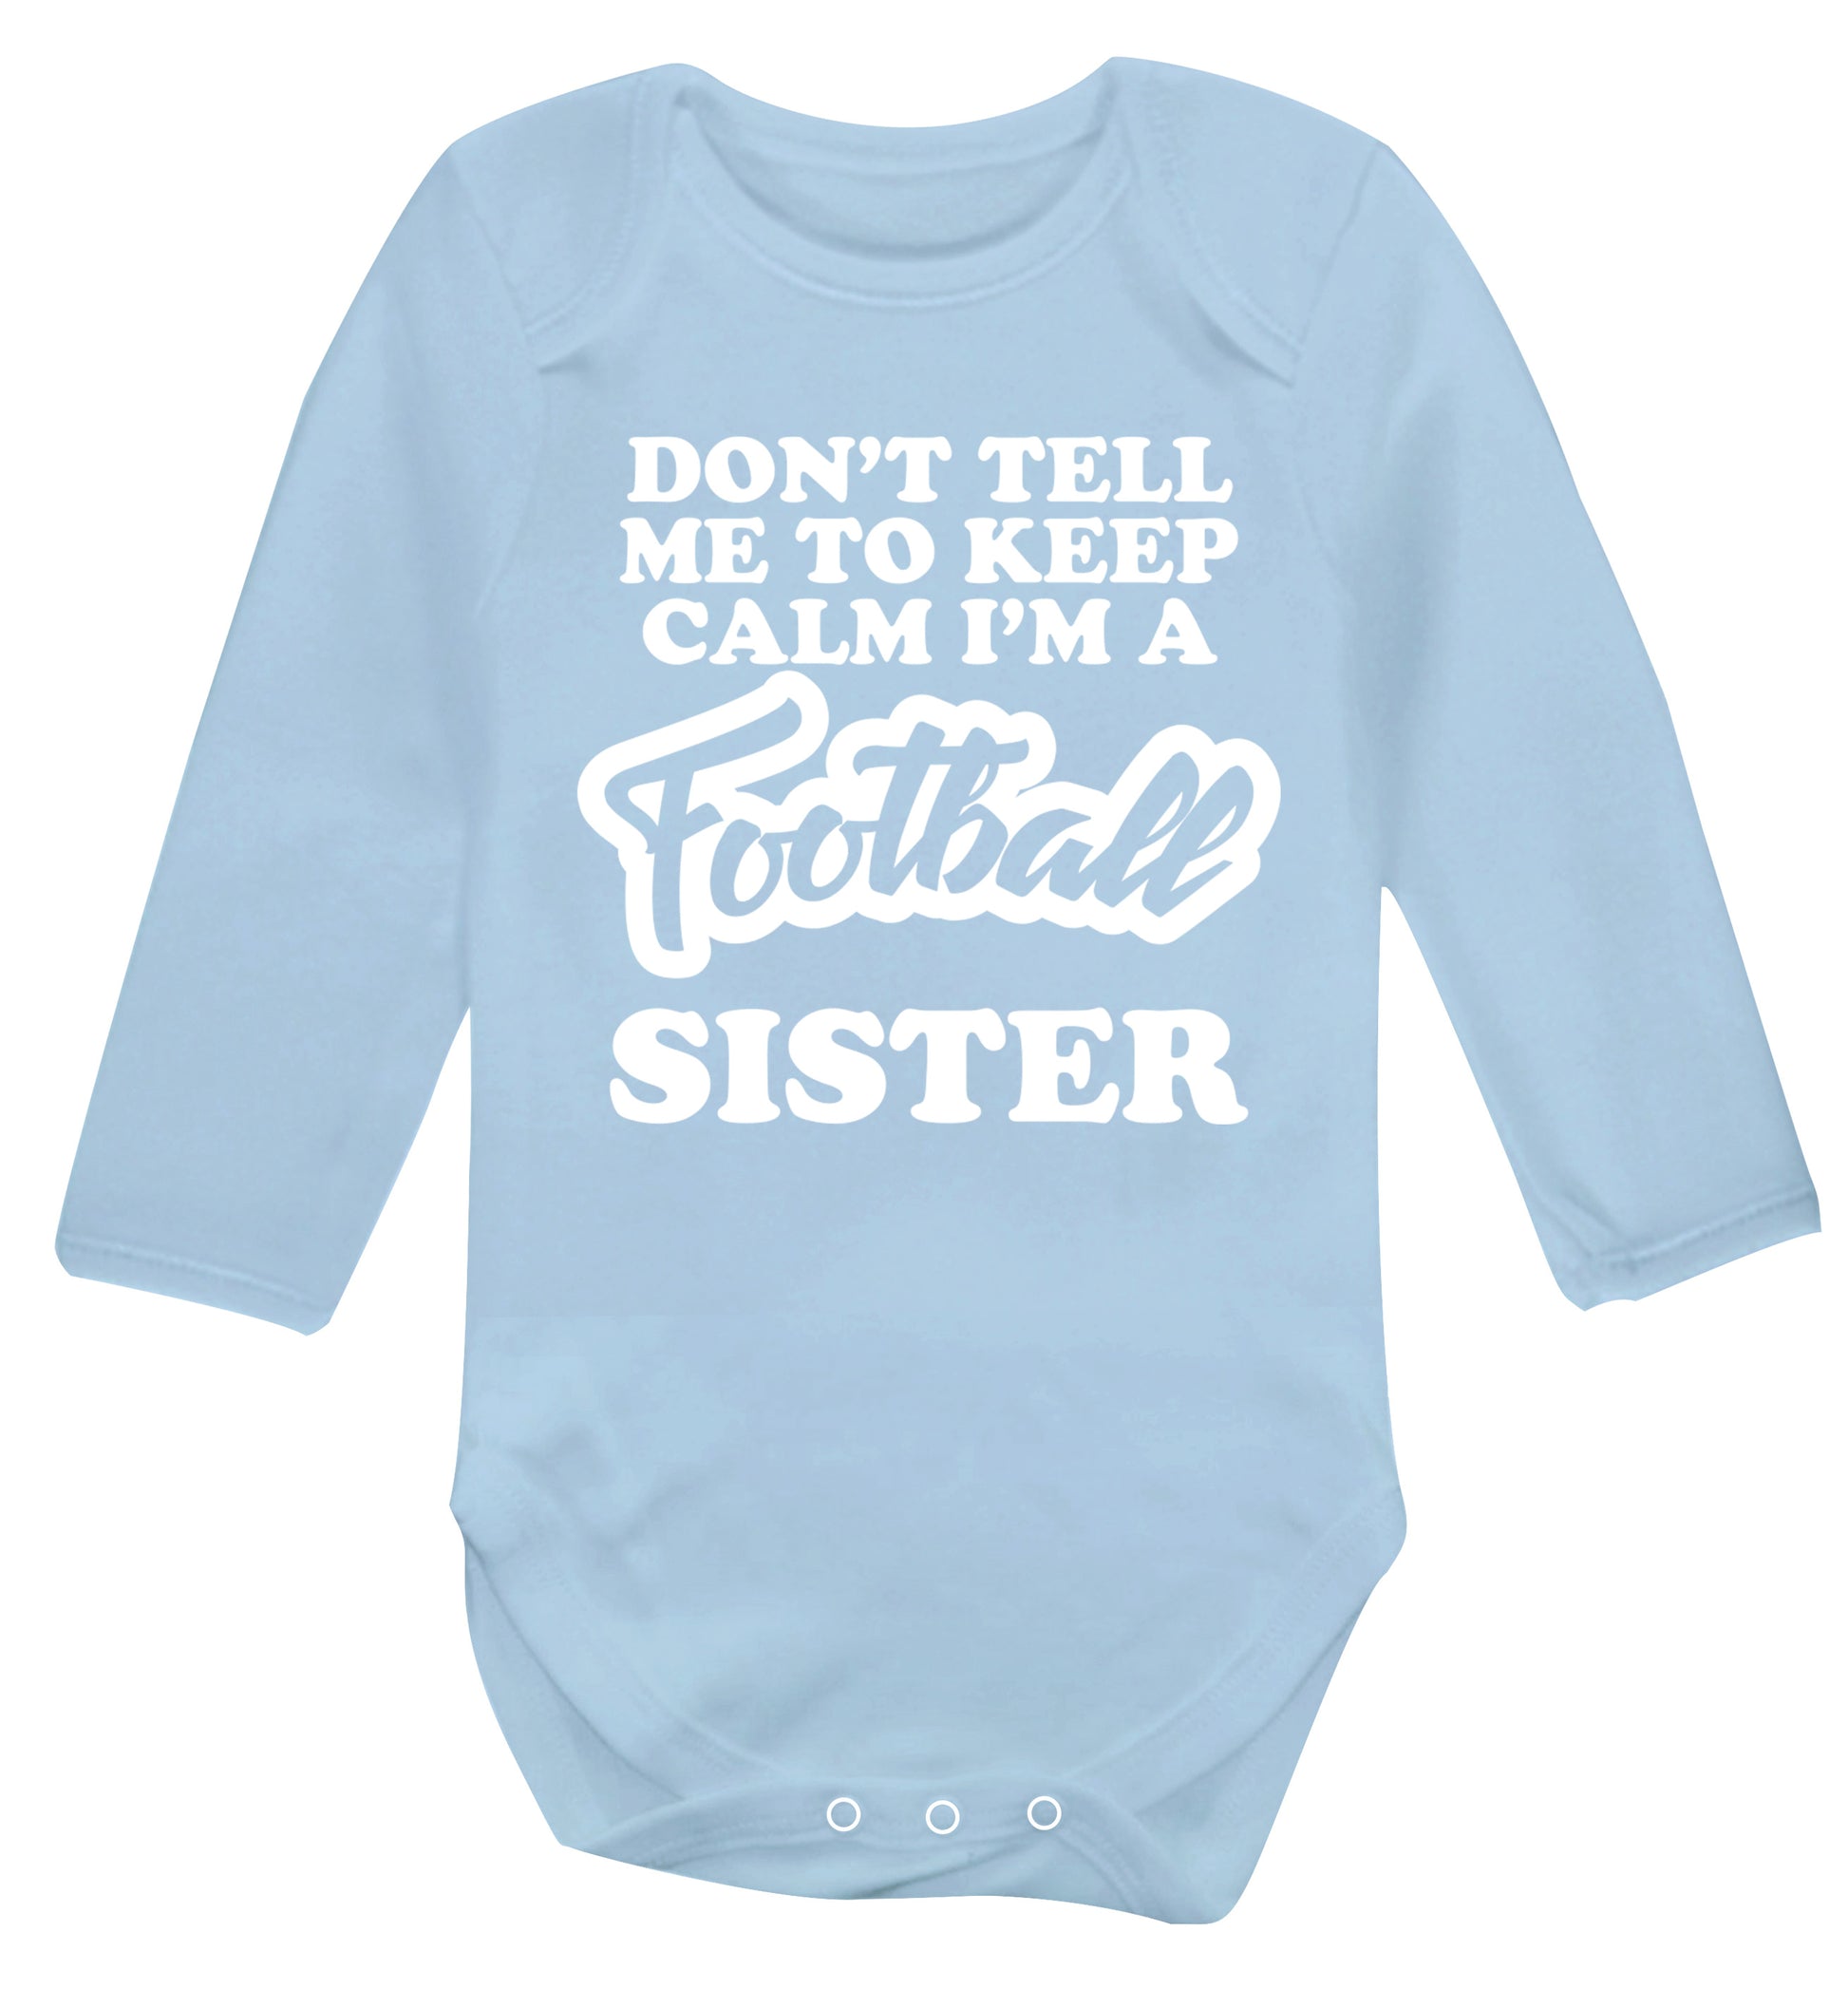 Don't tell me to keep calm I'm a football sister Baby Vest long sleeved pale blue 6-12 months